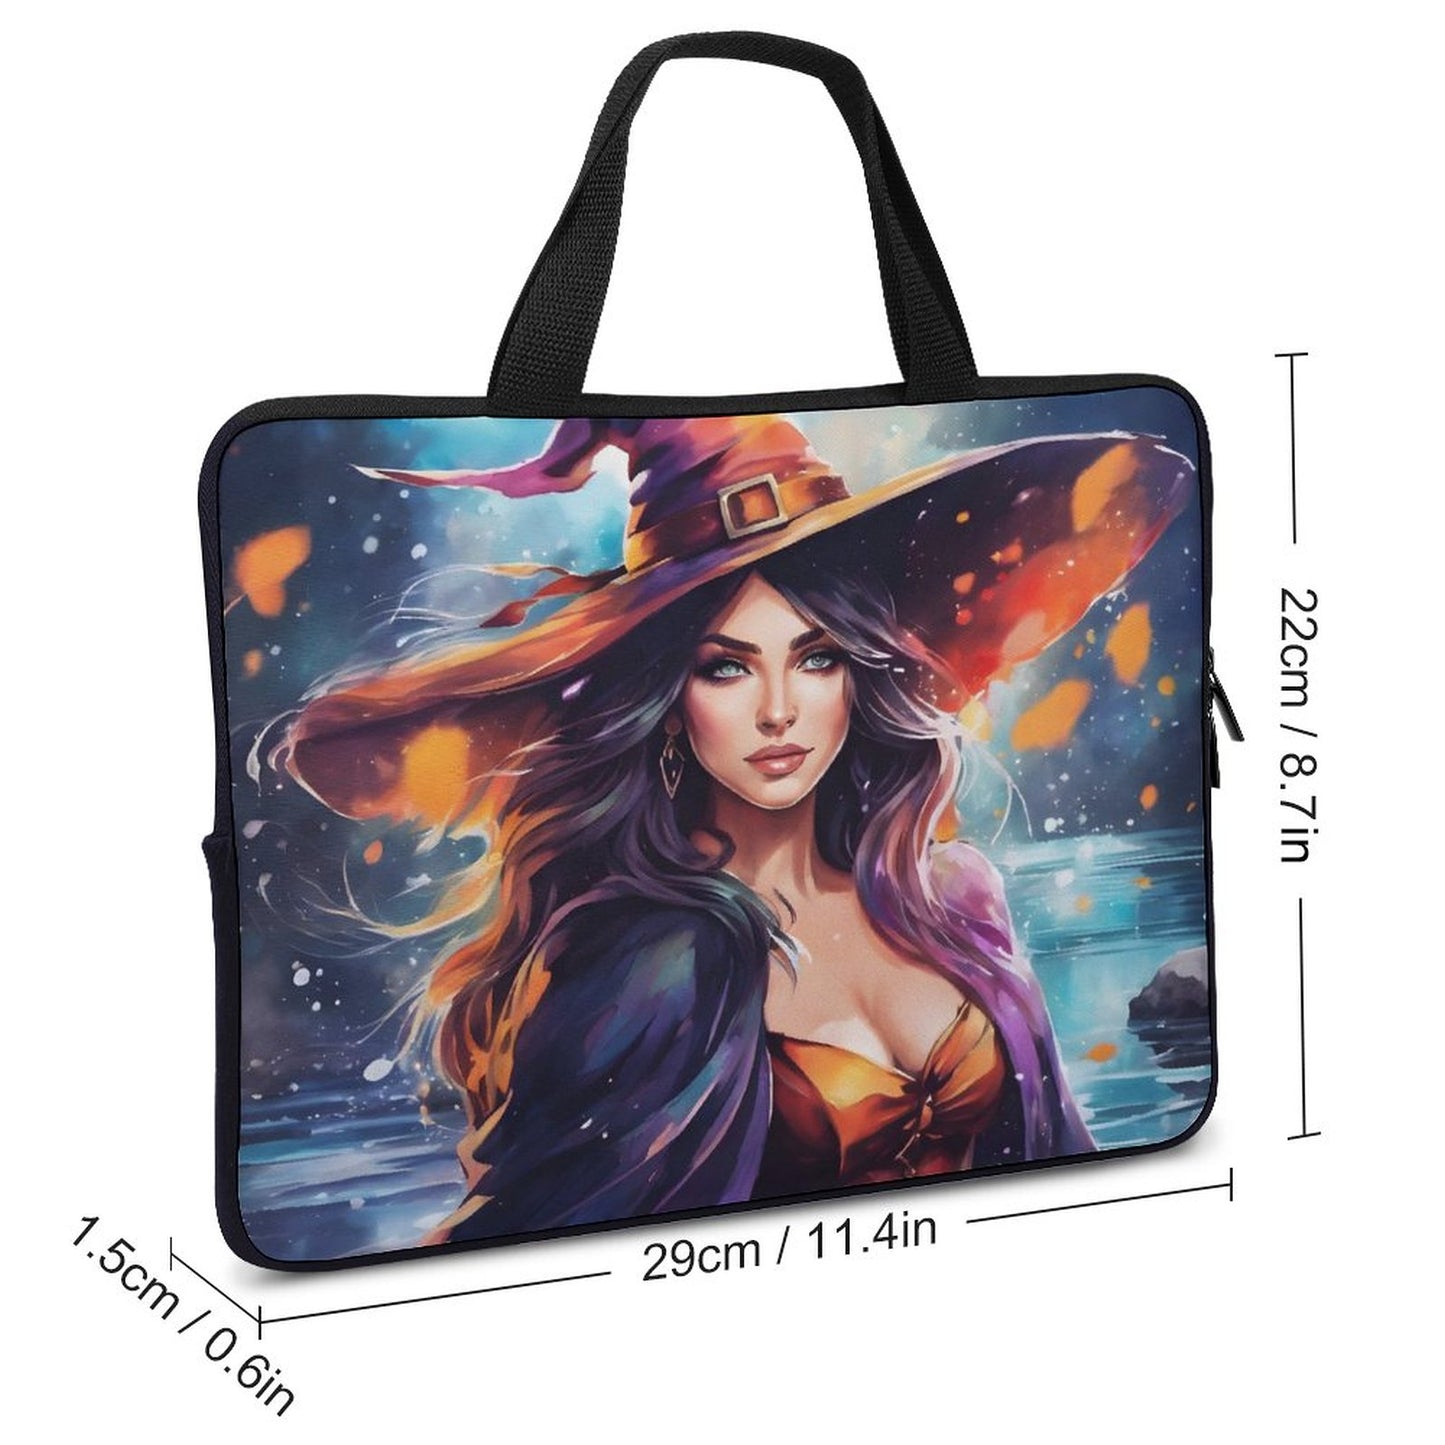 Water Witch Laptop Bag